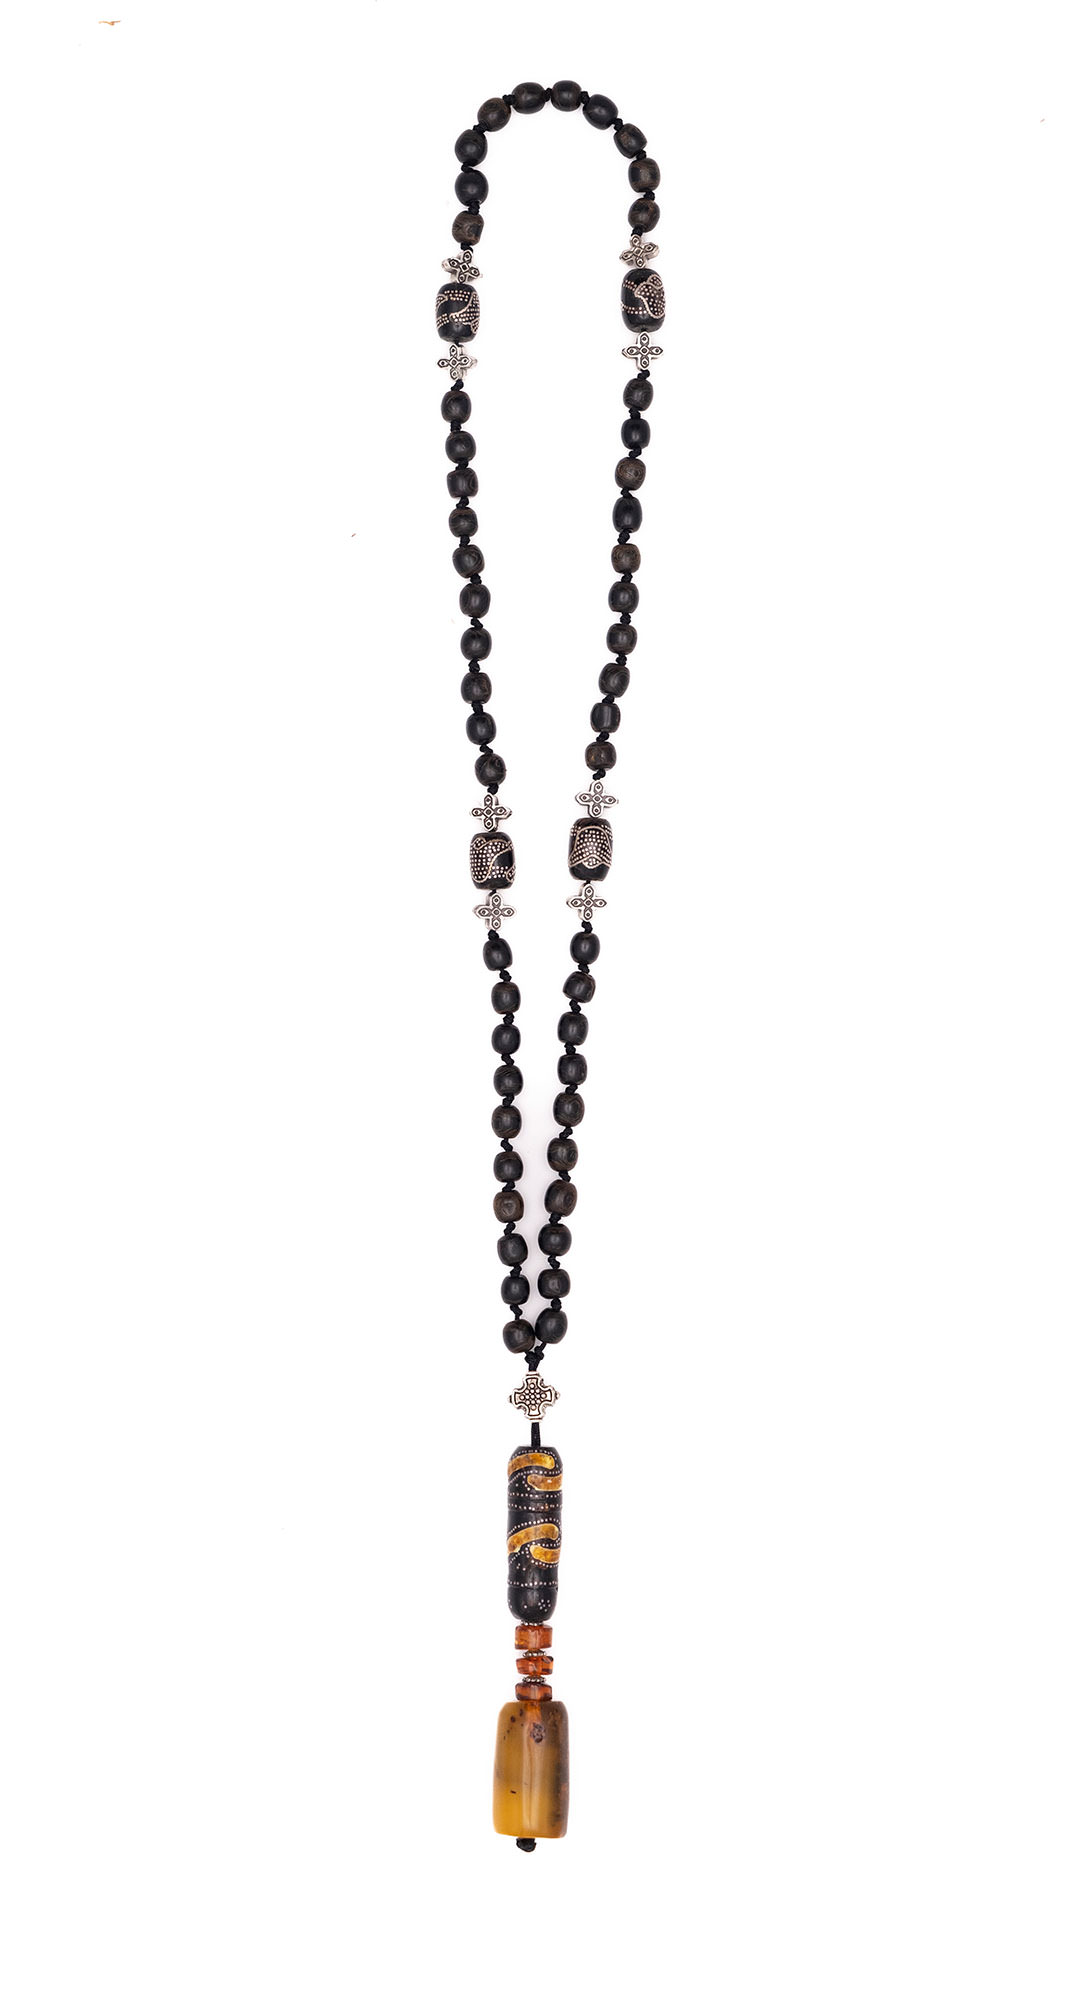 Catholic Prayer beads (Rosary) made of Black Coral (Yusuri) 1880-1900, Amber from Baltic Sea cut by hand, silver and tin